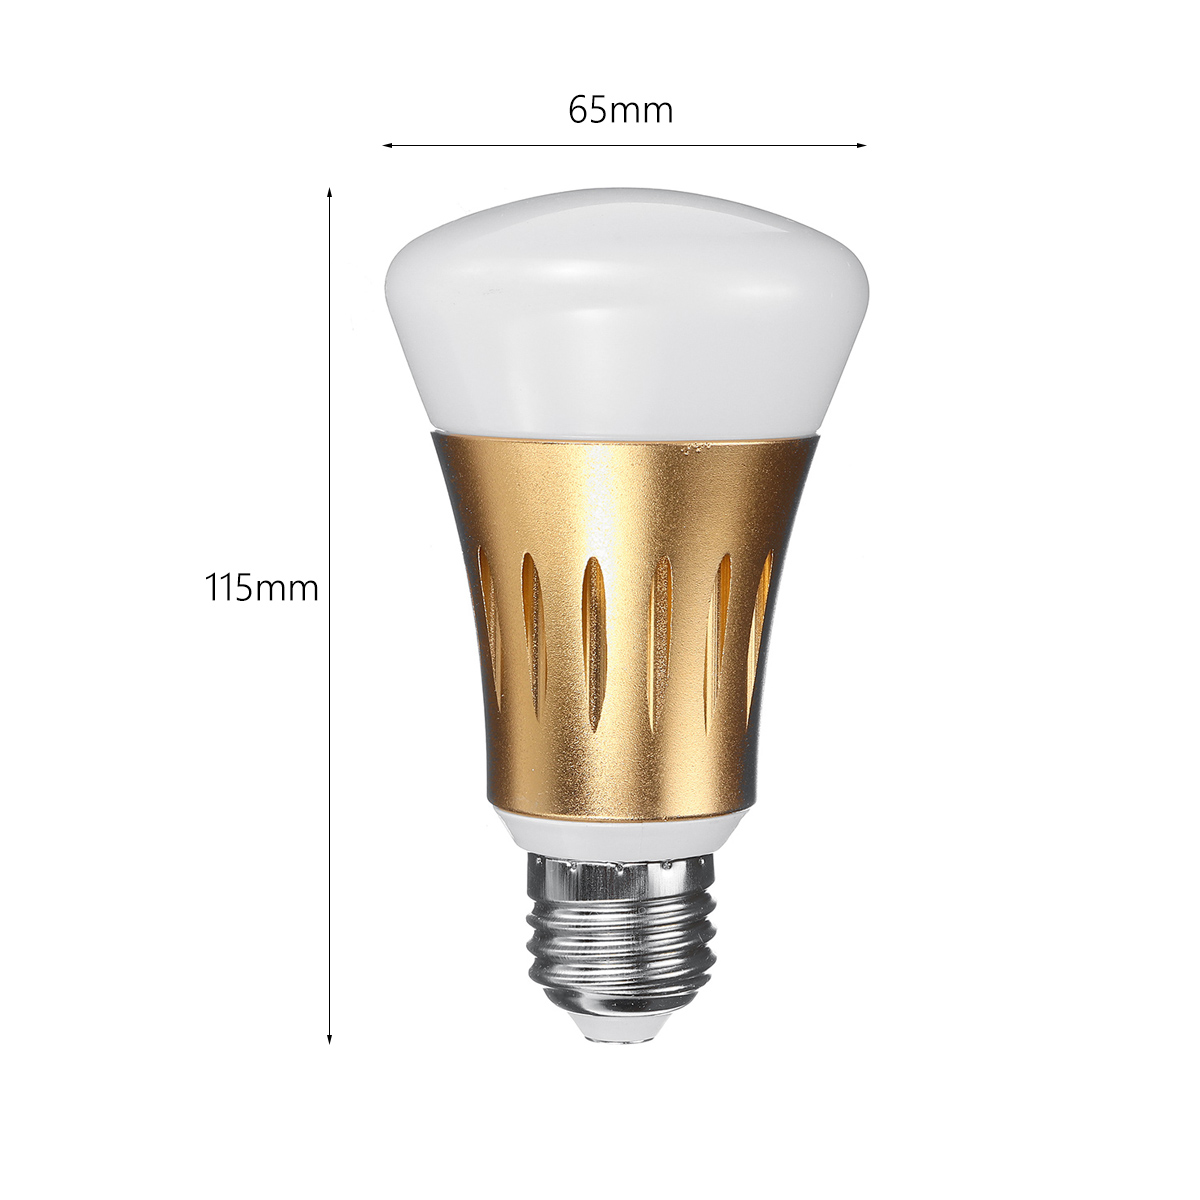 Find Wifi Smart Light Bulb 11W E27 RGBW Lamp For Google Home / Alexa / Amazon House for Sale on Gipsybee.com with cryptocurrencies